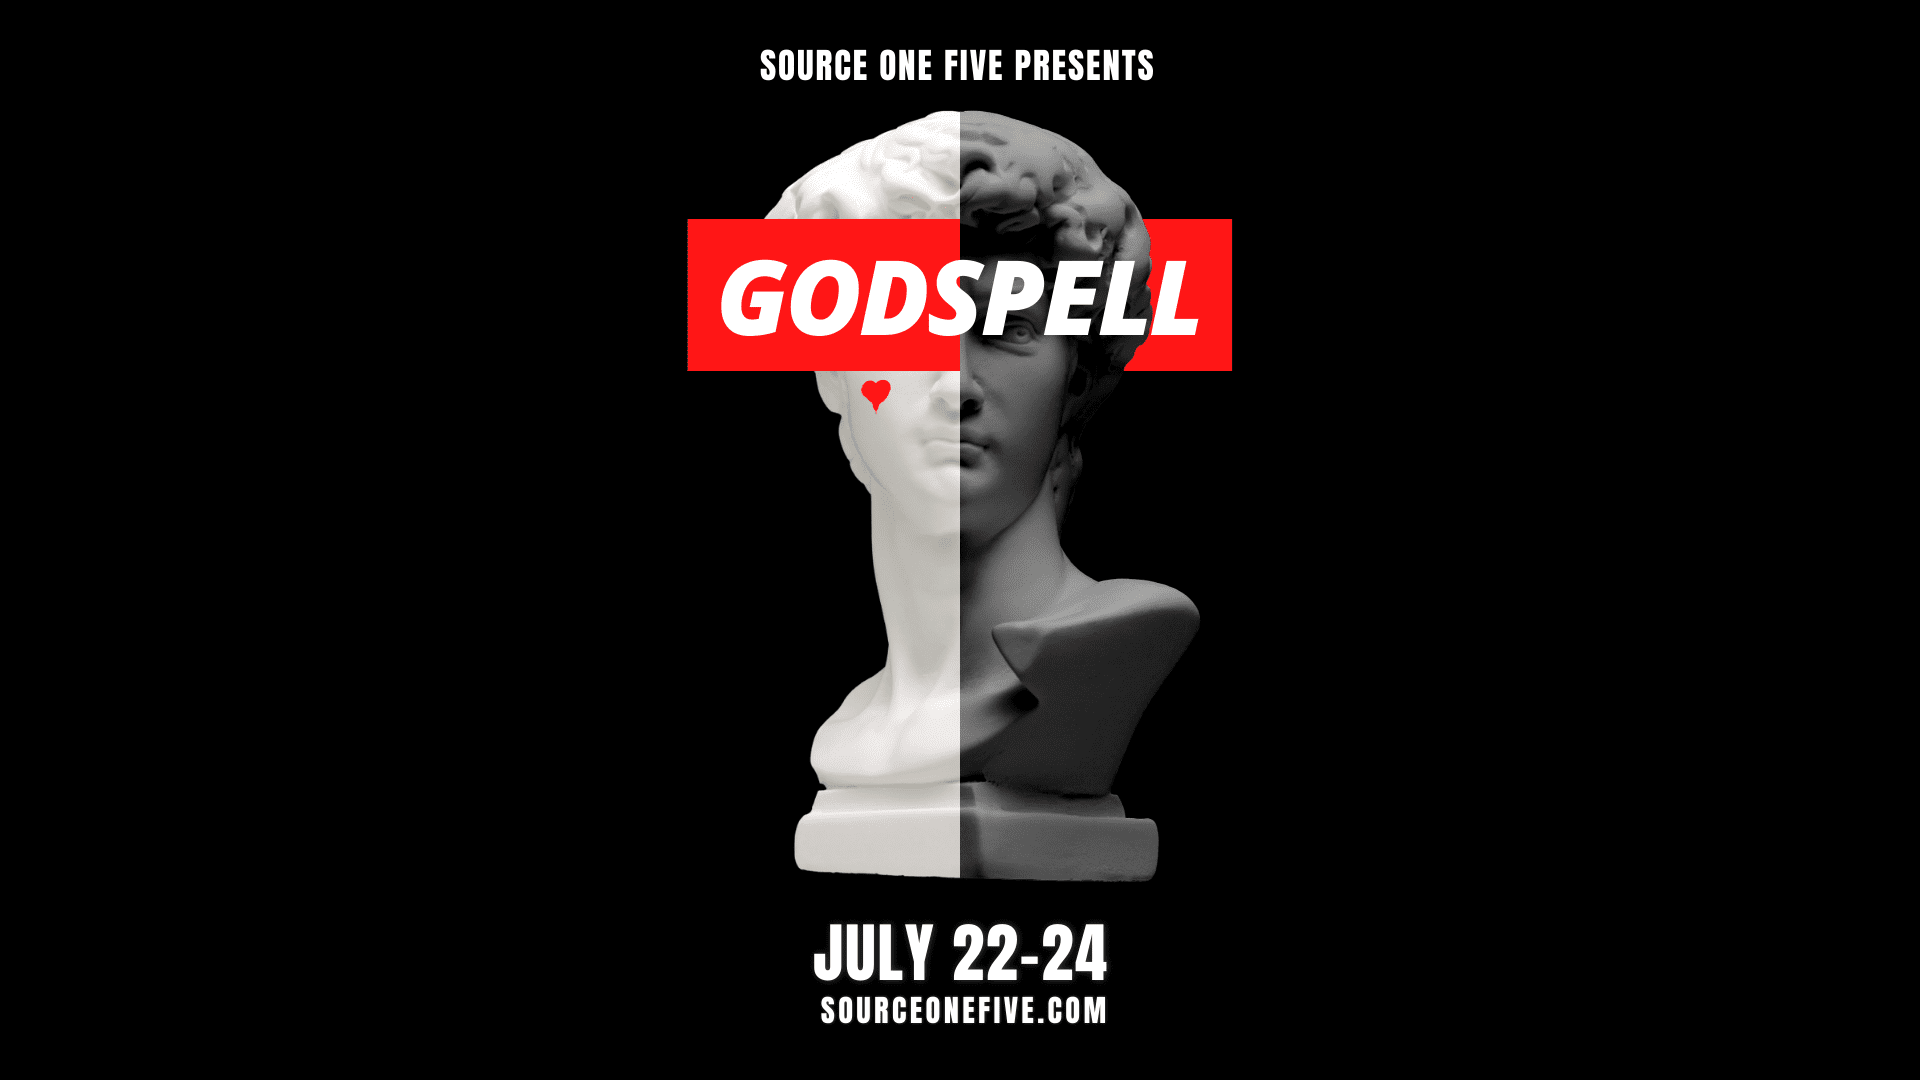 Franklin Event_Source One Five Presents GODSPELL.